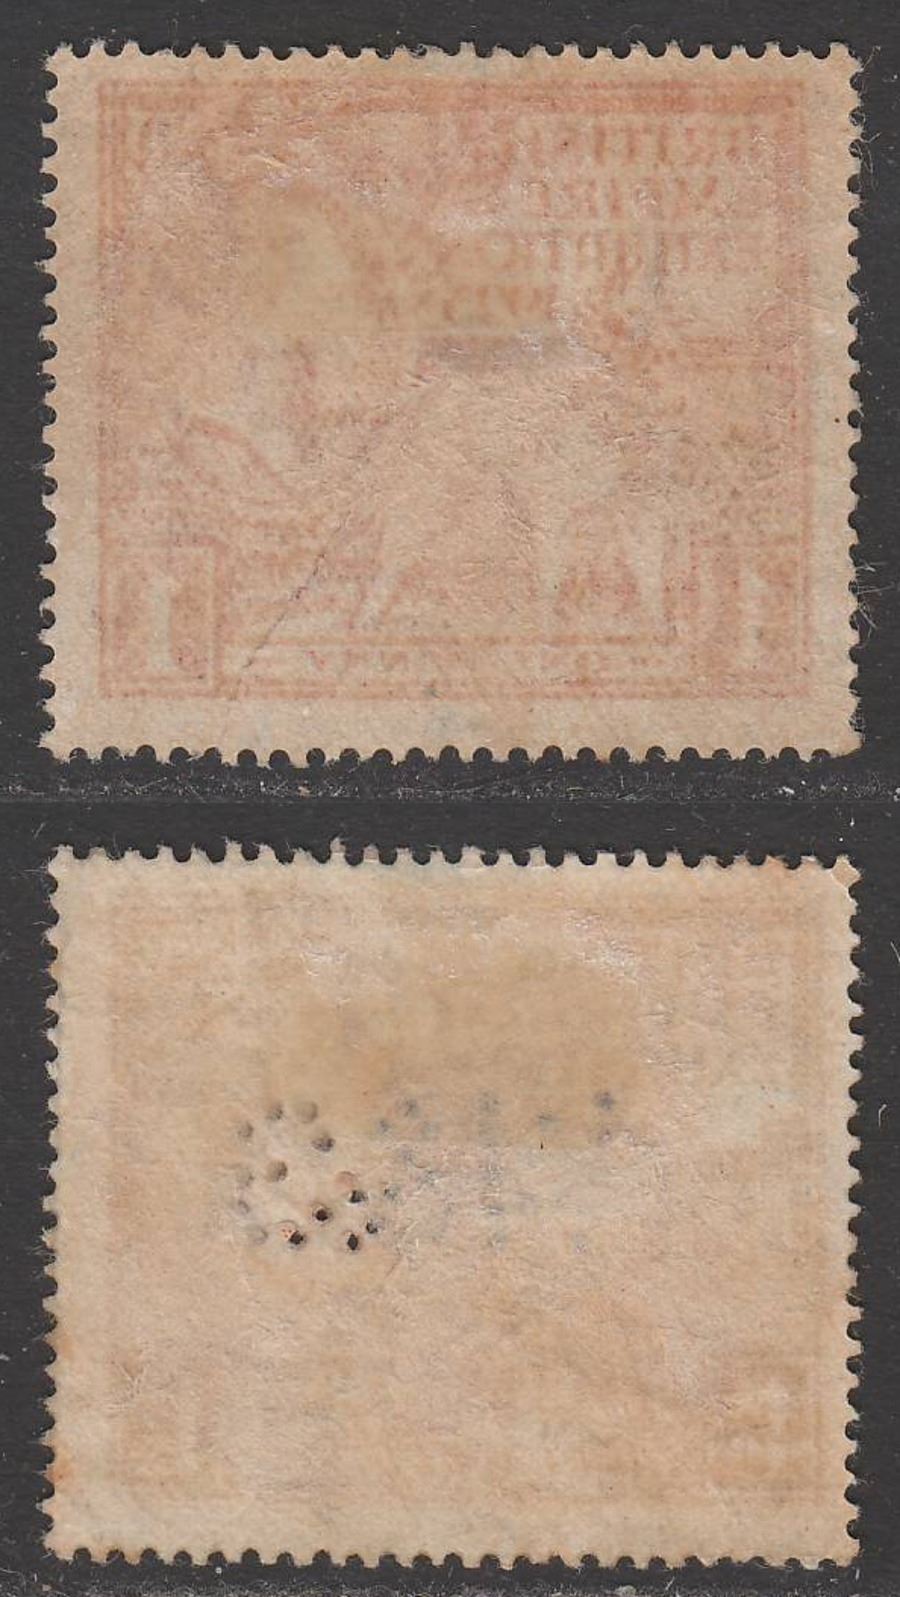 KGV 1925 British Empire Exhibition 1d, 1½d Used SG432-433 cat £100 1d large tear